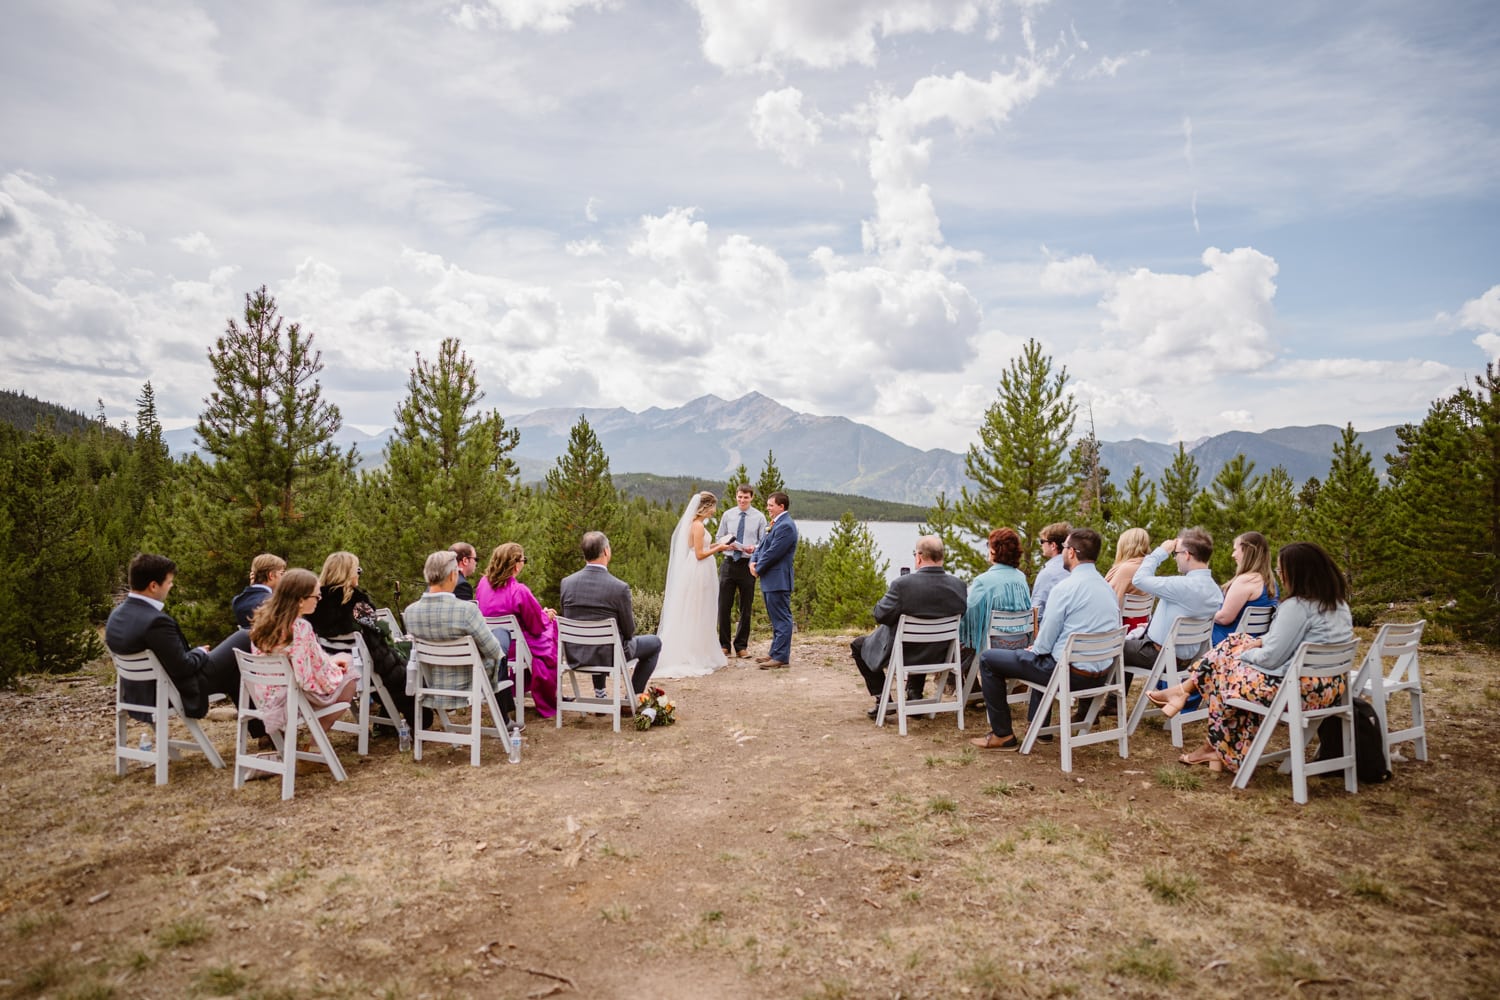 A couple sharing their vows with their families at Windy Point Campground in Breckenridge, Colorado.